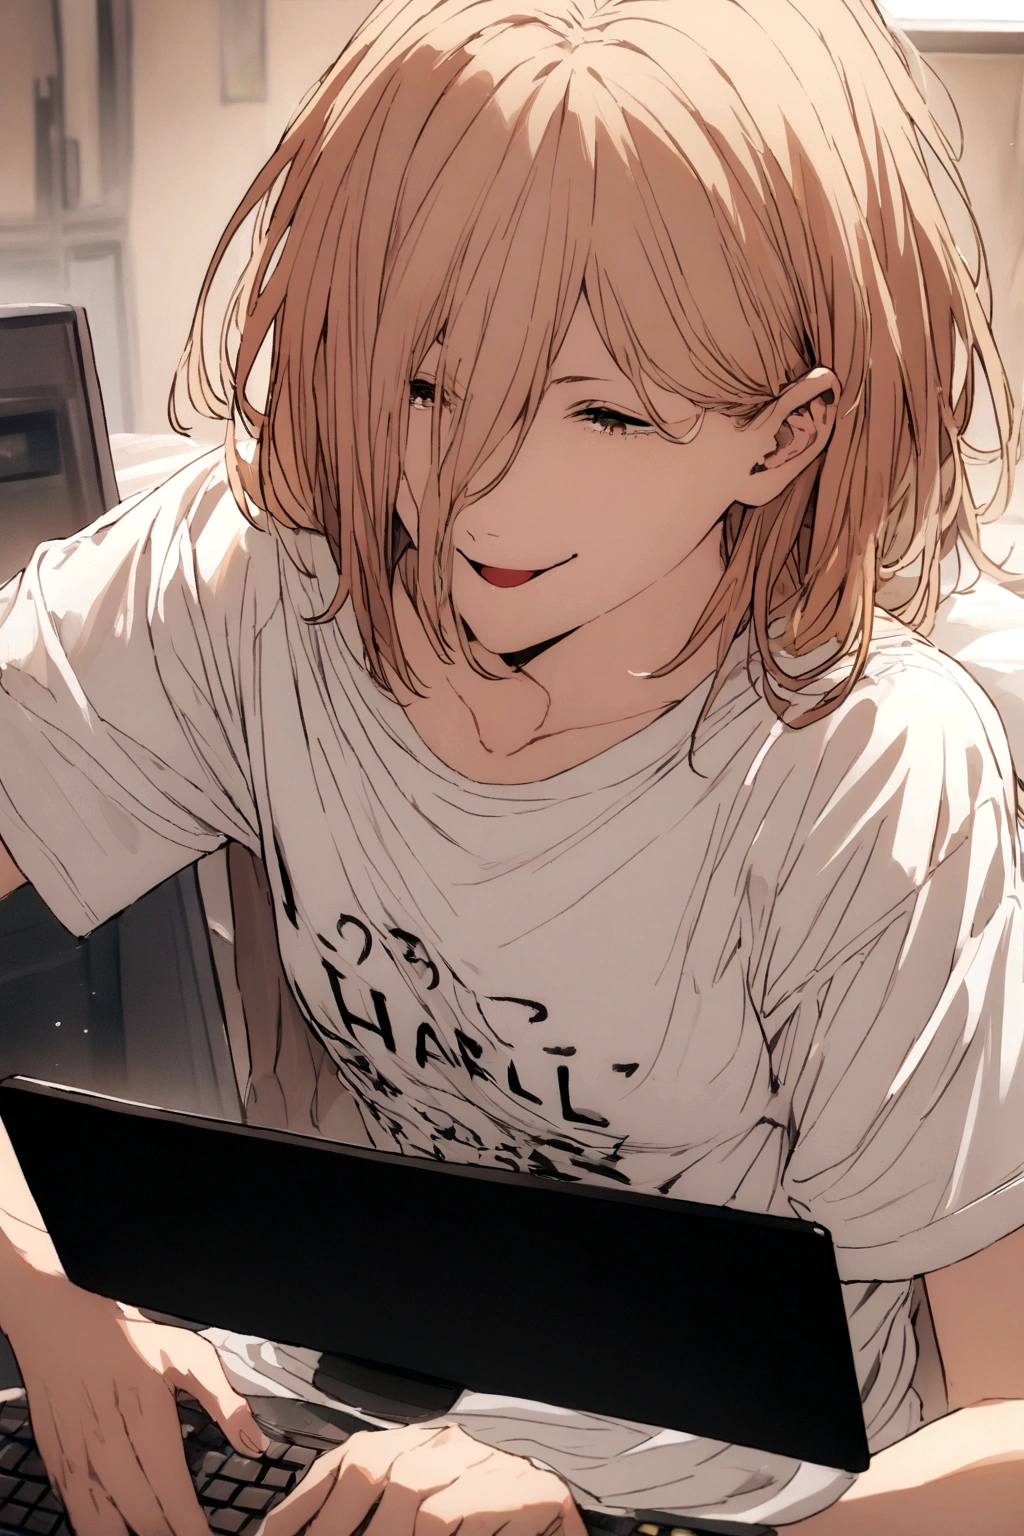 A Power,playing on a PC,all happy and cheerful,wearing a shirt written, Harl,in the middle, of the shirt.